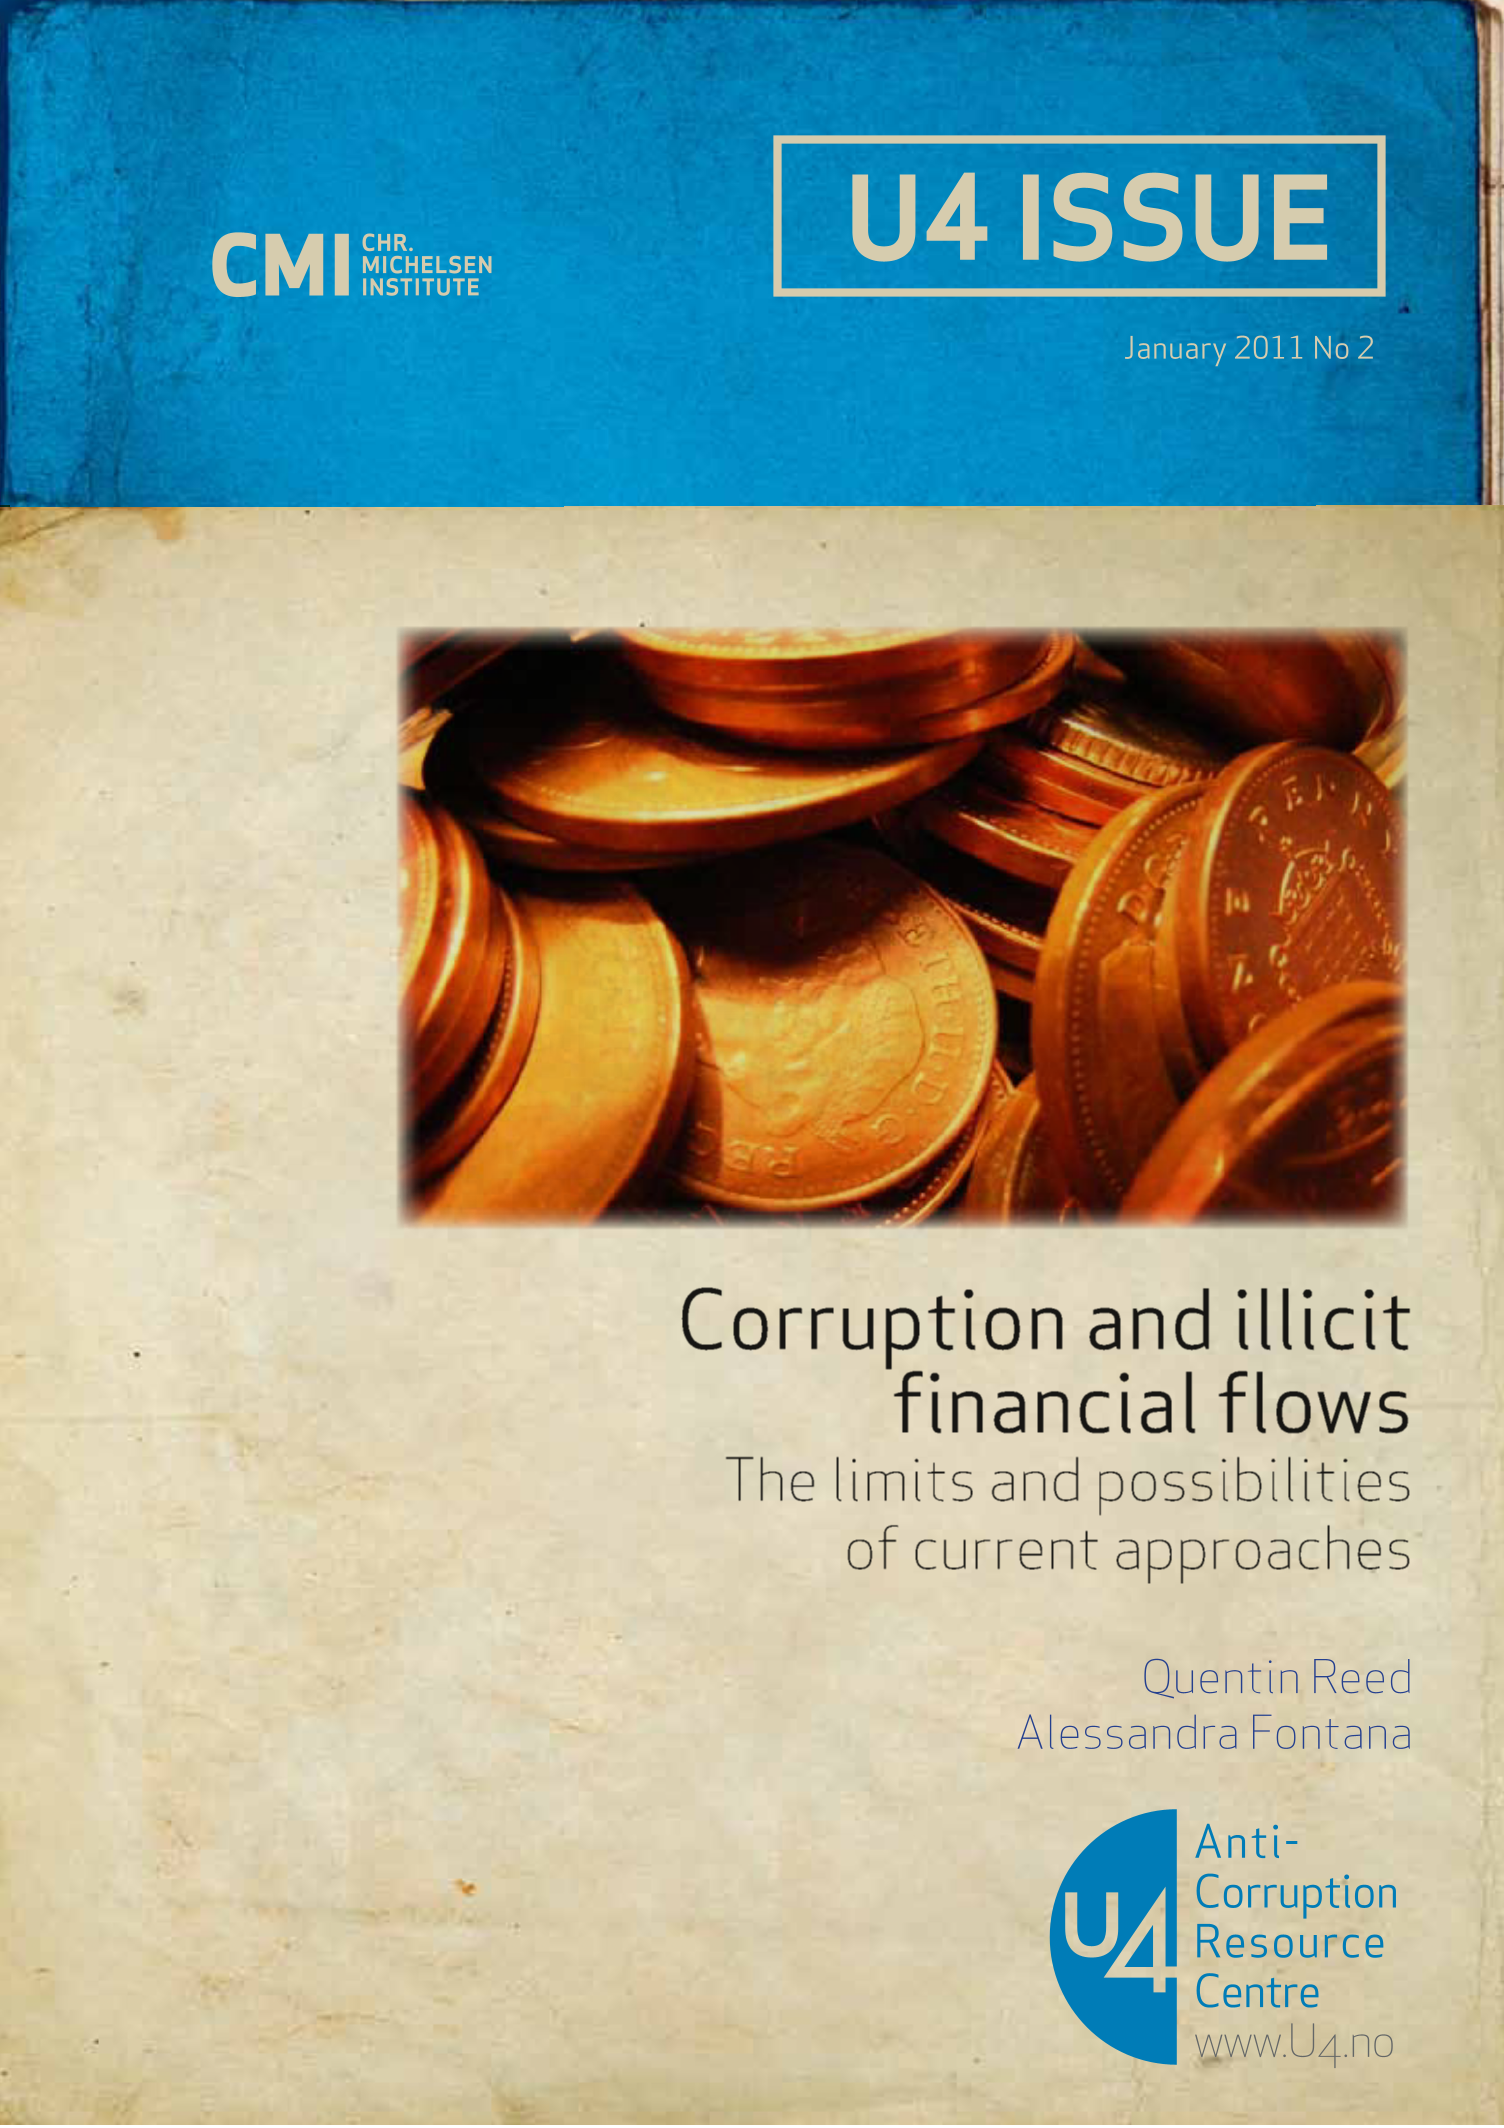 Corruption and illicit financial flows: The limits and possibilities of current approaches